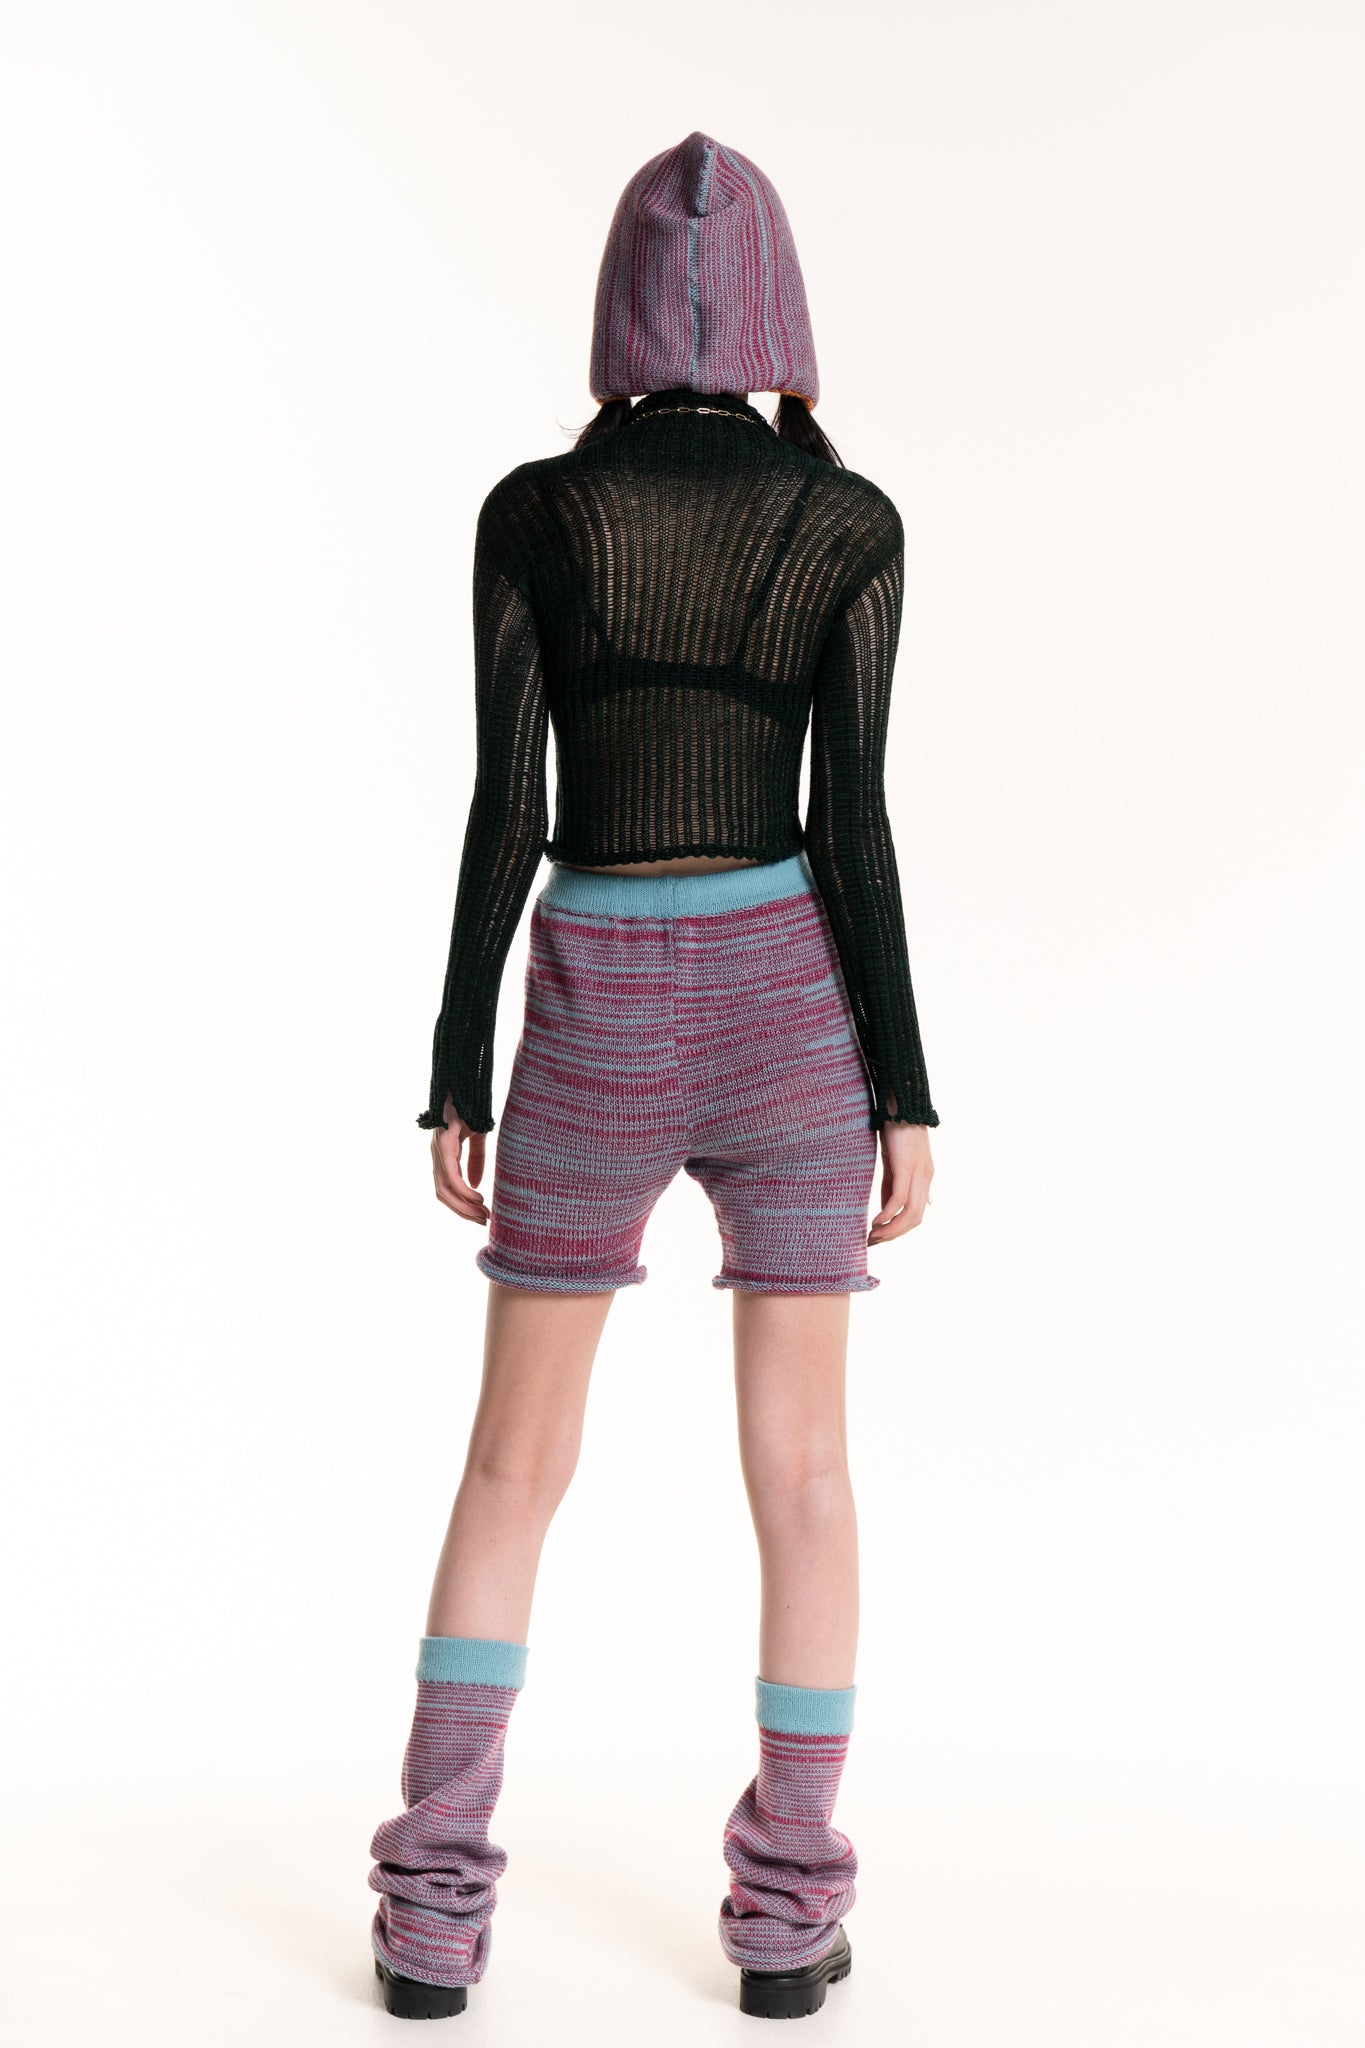 Ladder-Lace Sheer Knit Sweater - heyzoemay